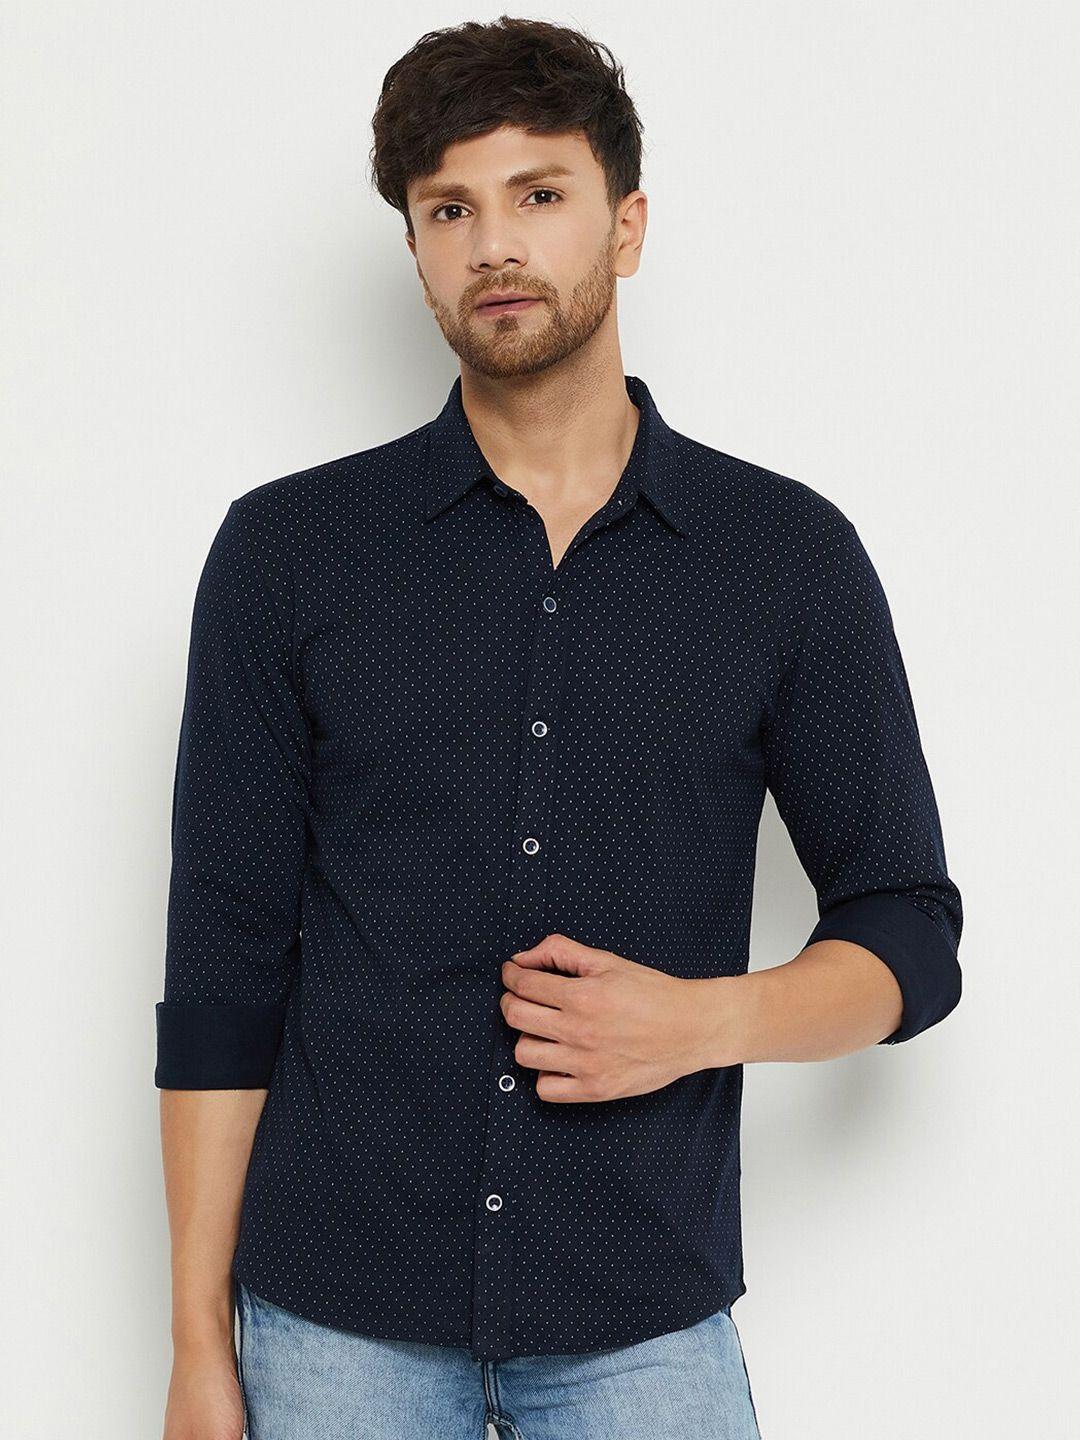 wild west comfort opaque printed cotton casual shirt